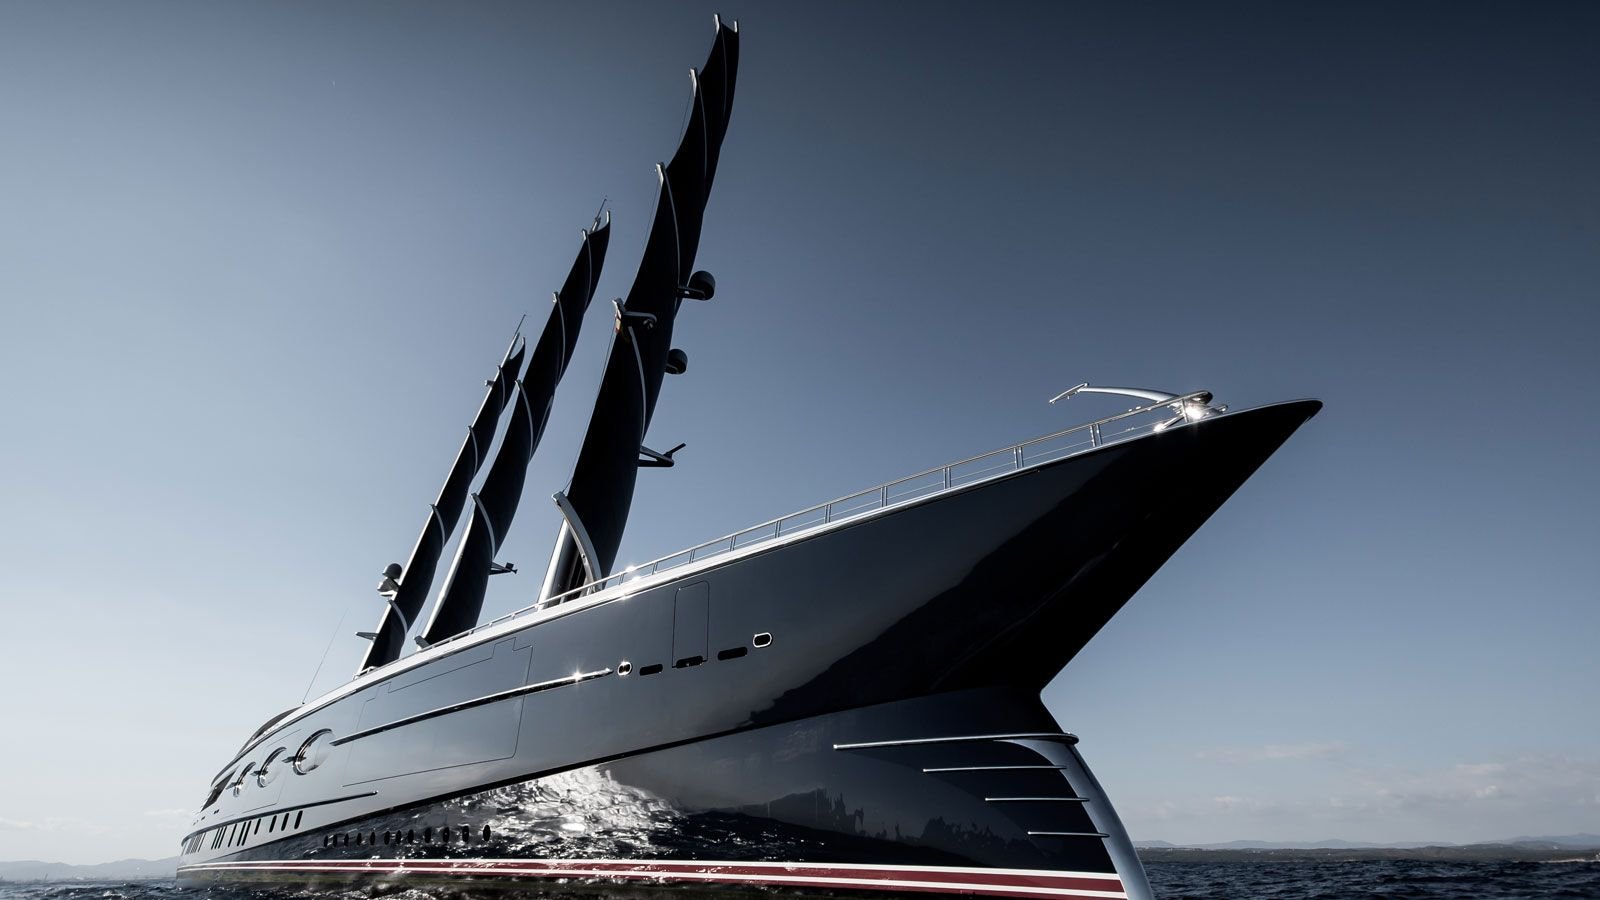 Top 10 largest sailing yachts in the world